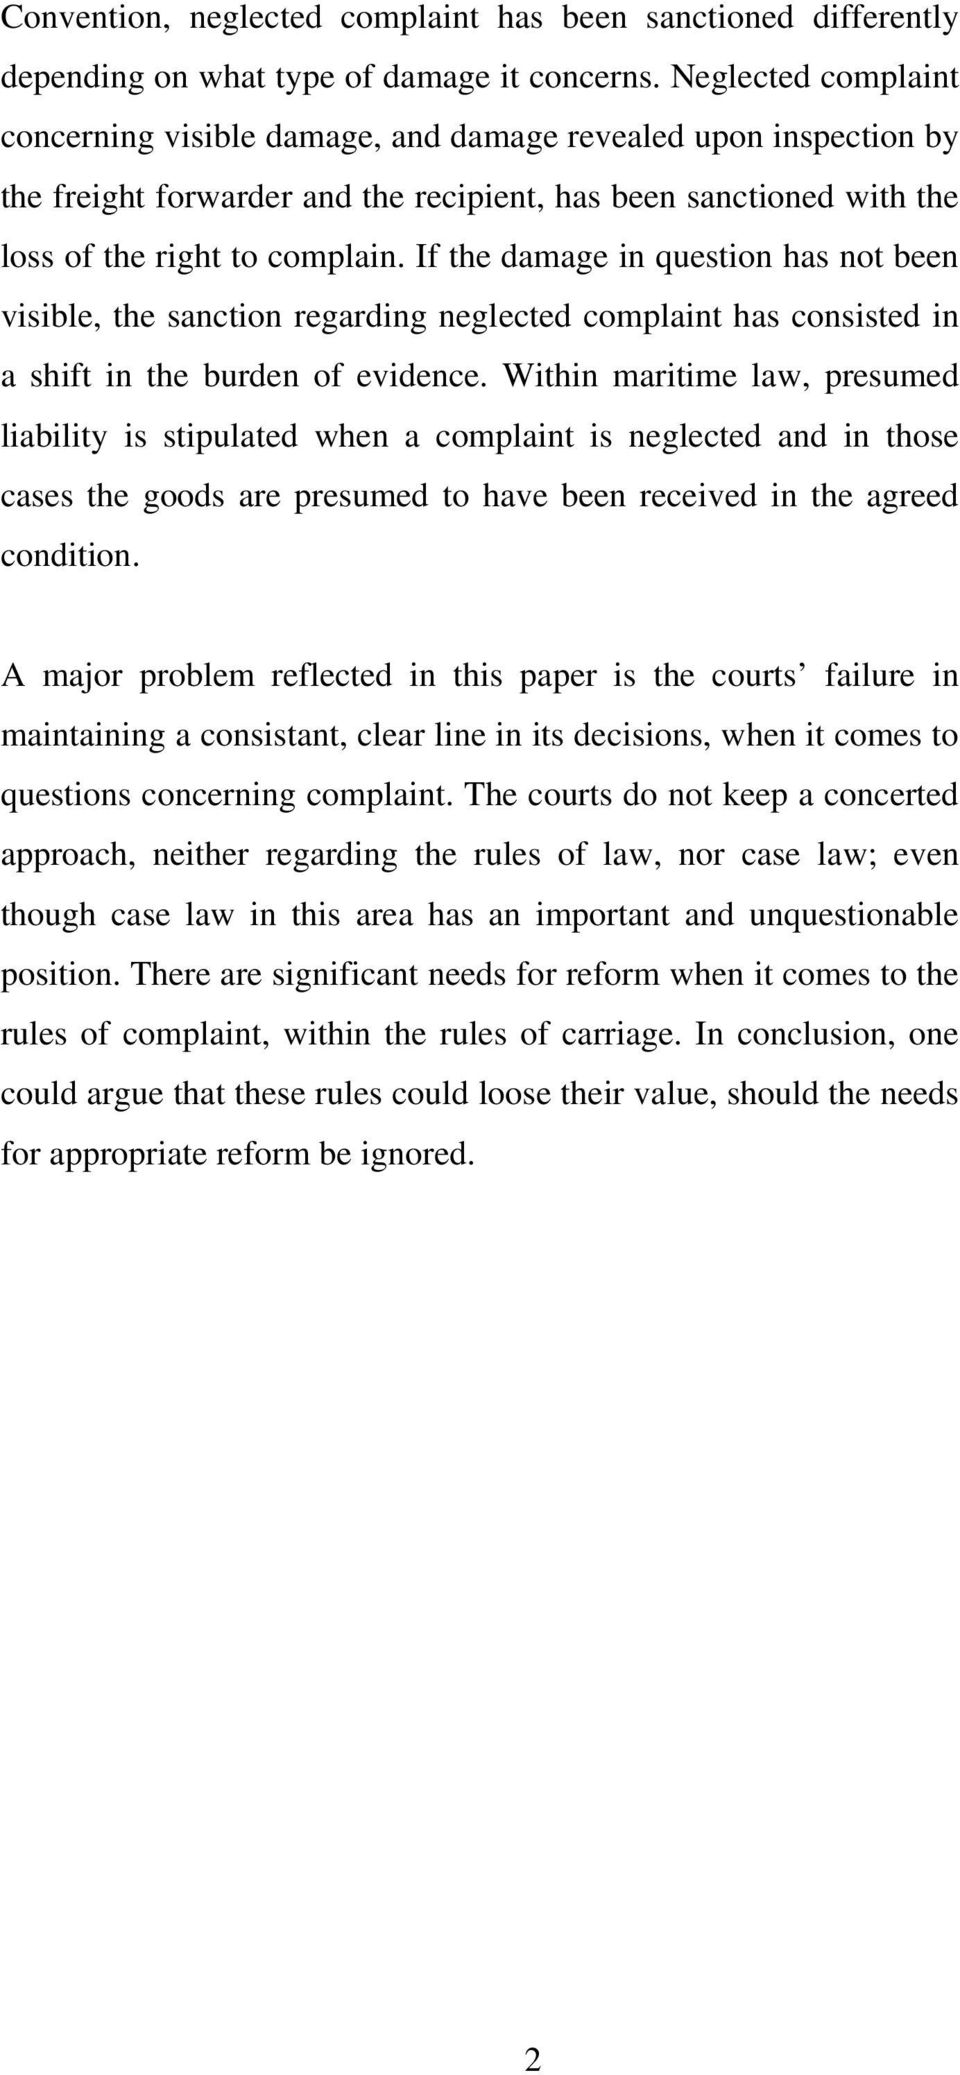 If the damage in question has not been visible, the sanction regarding neglected complaint has consisted in a shift in the burden of evidence.